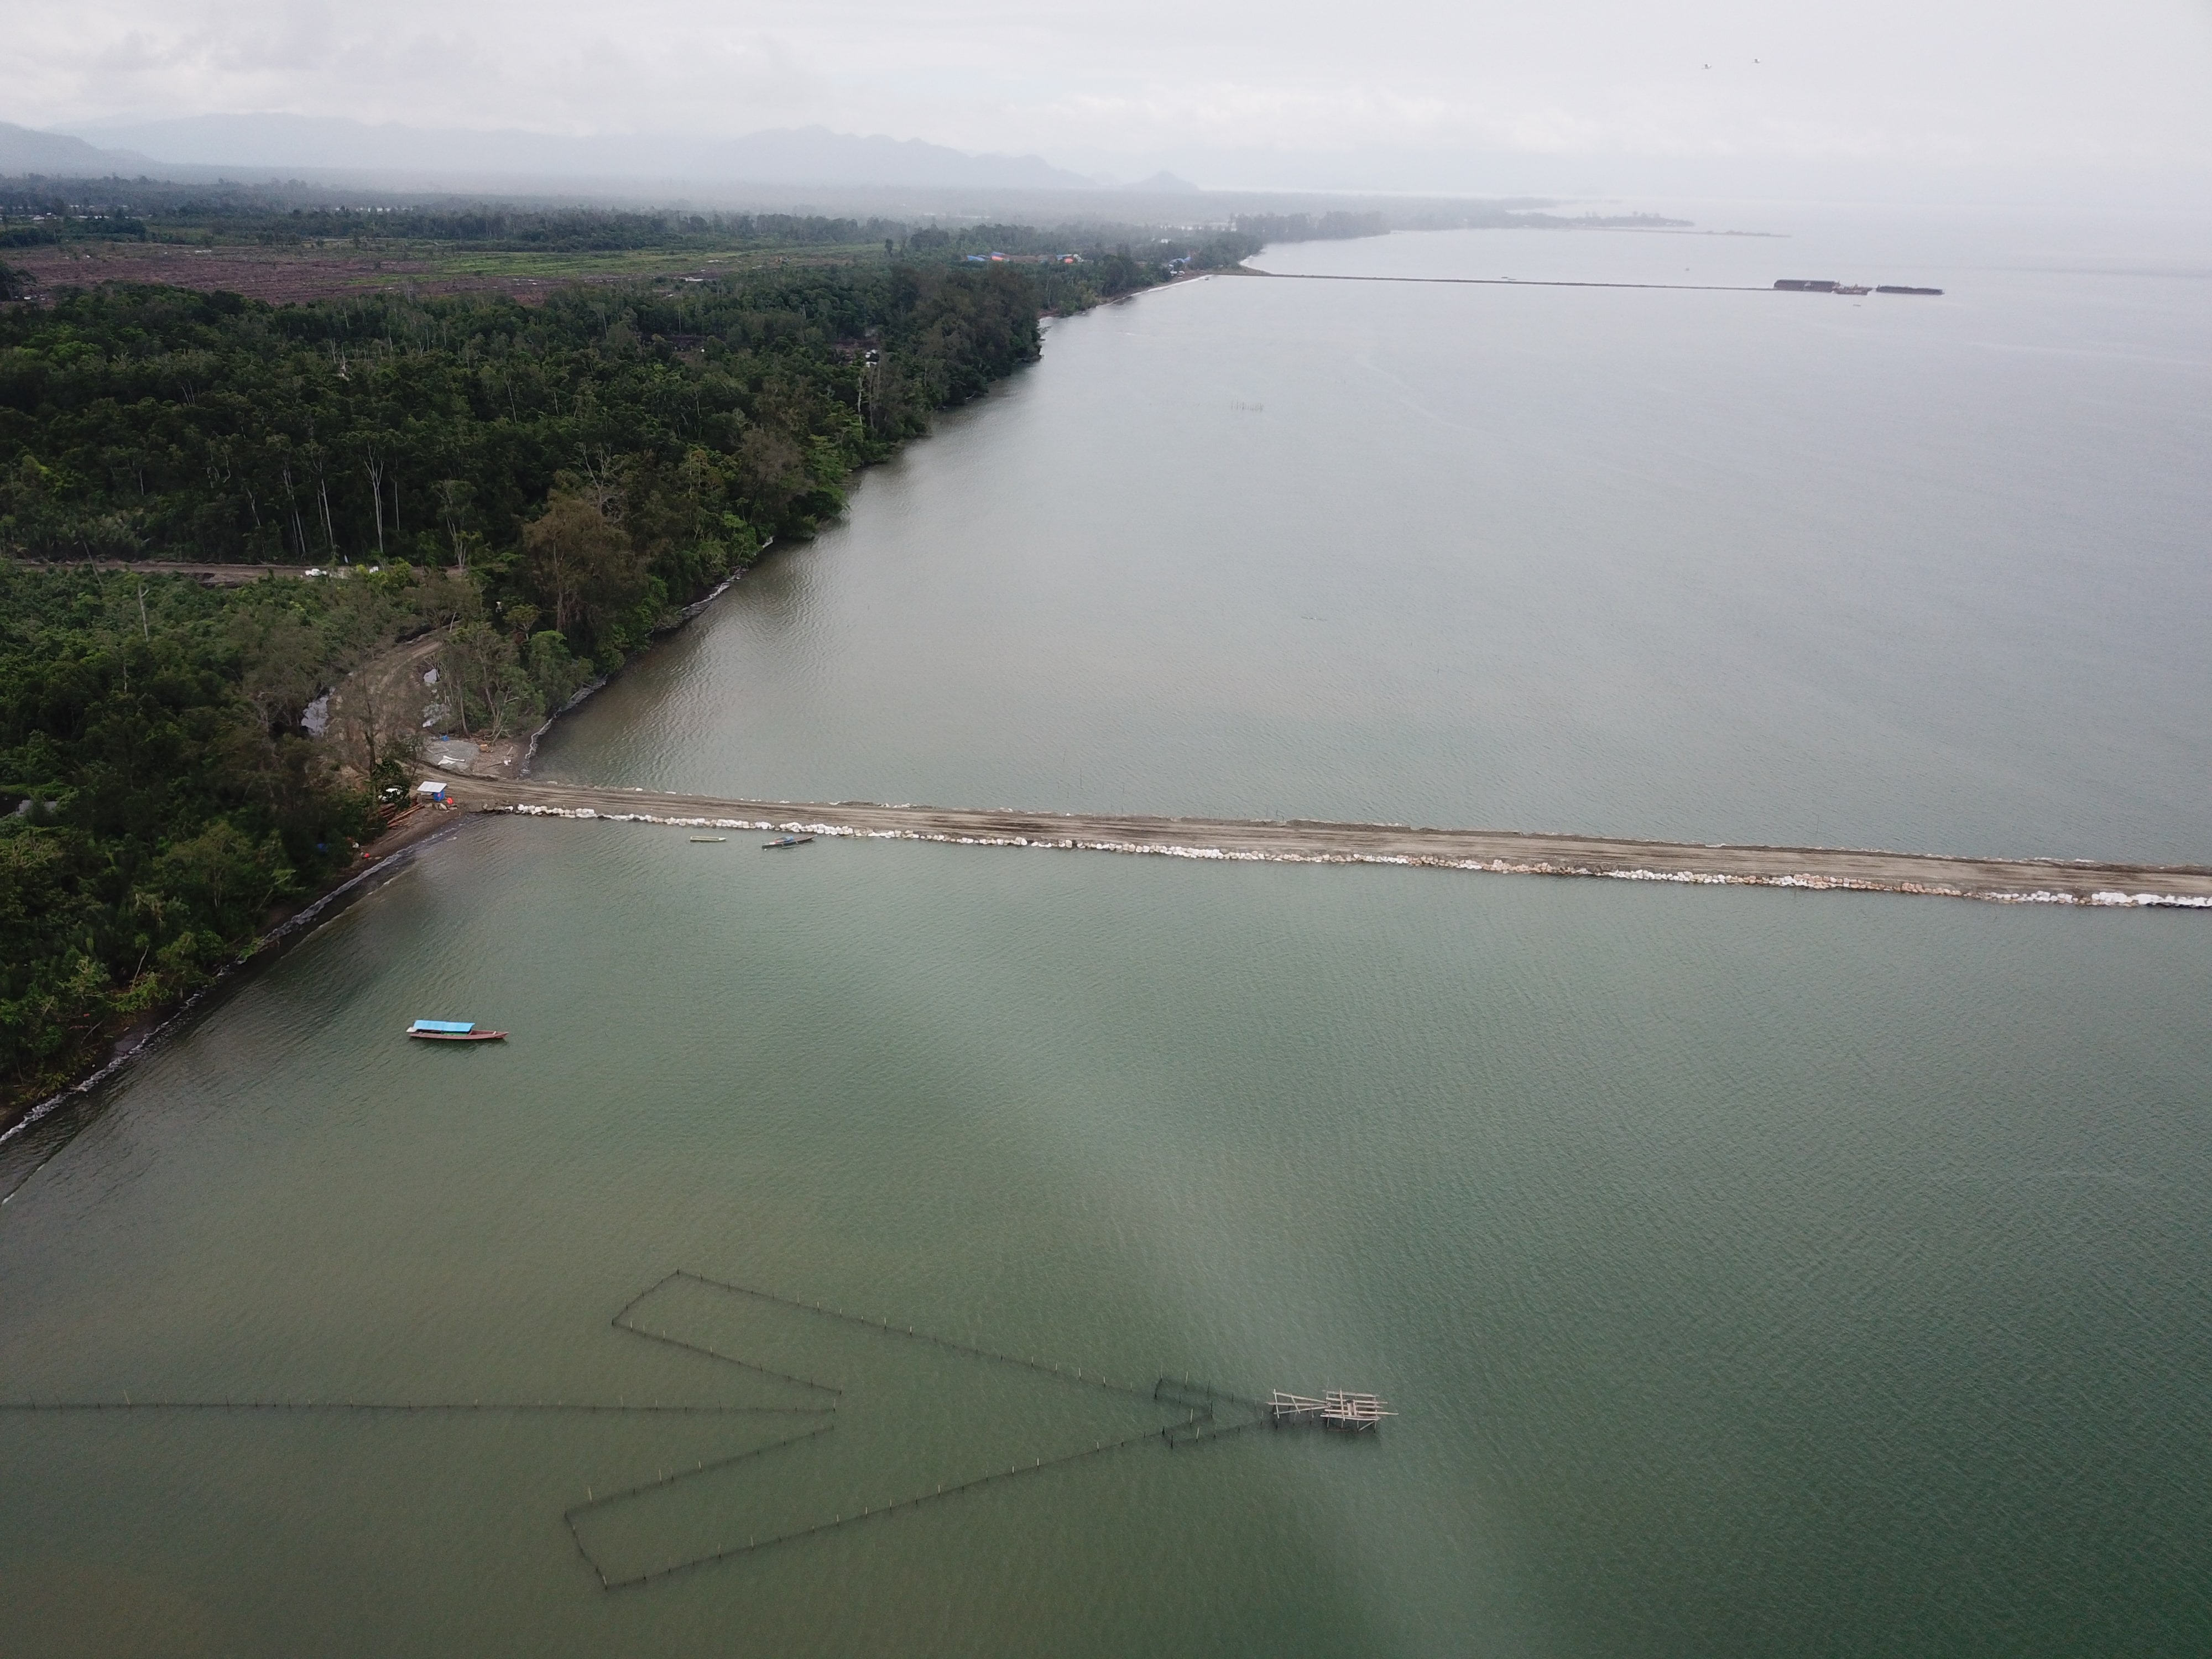 Bumanik : Our Jetty and Safety